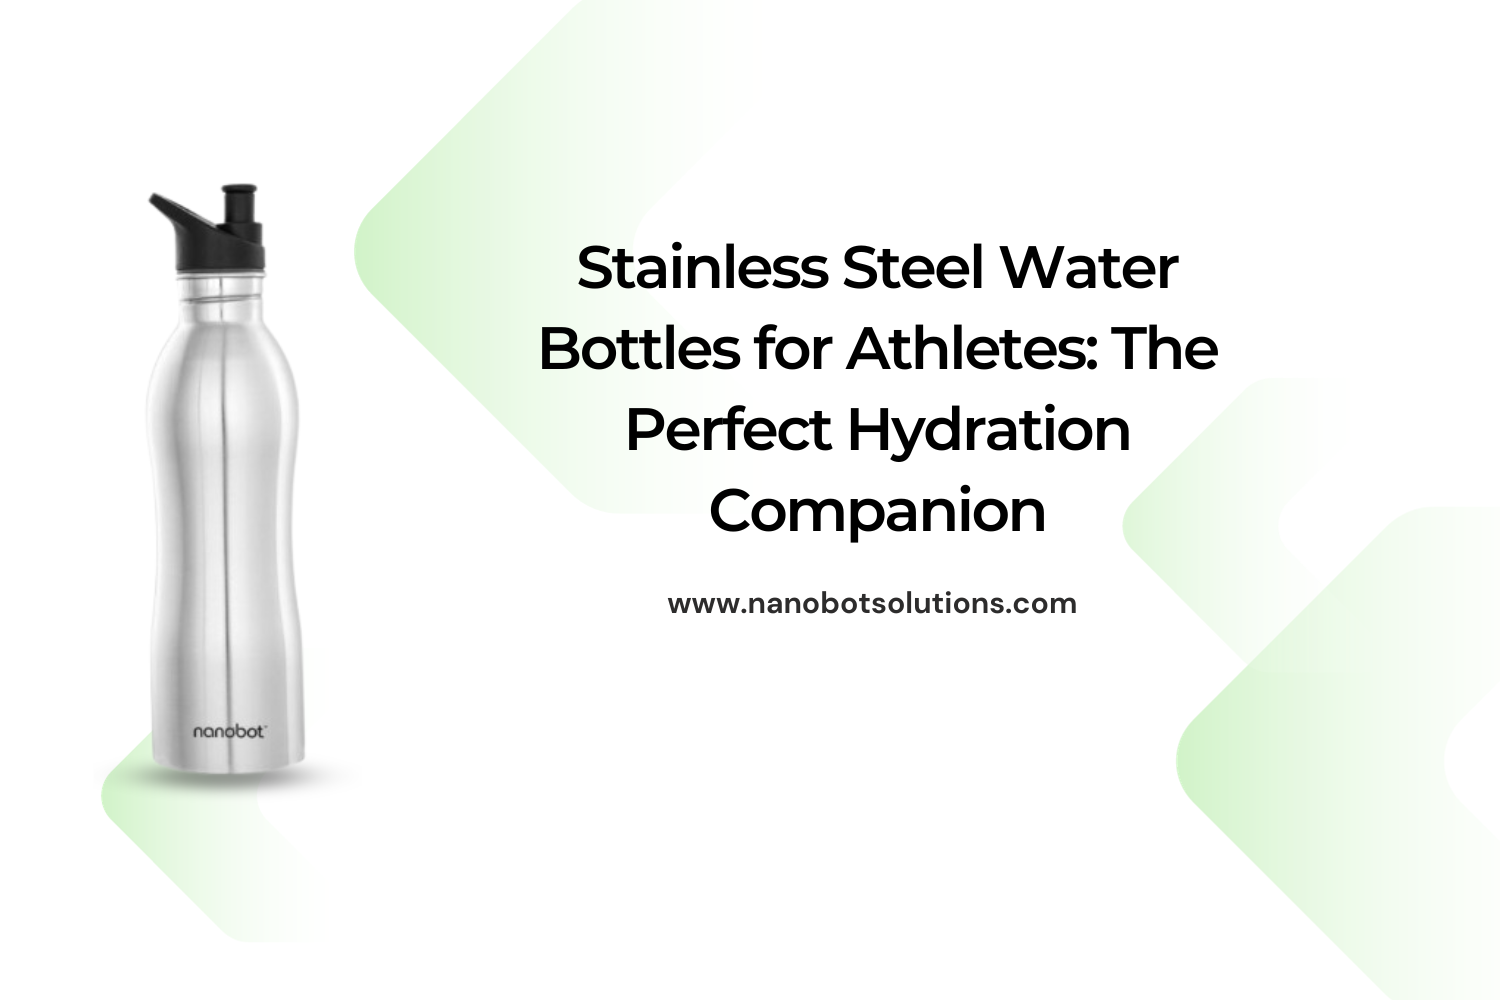 Stainless Steel Water Bottles for Athletes The Perfect Hydration Companion | Nanobot